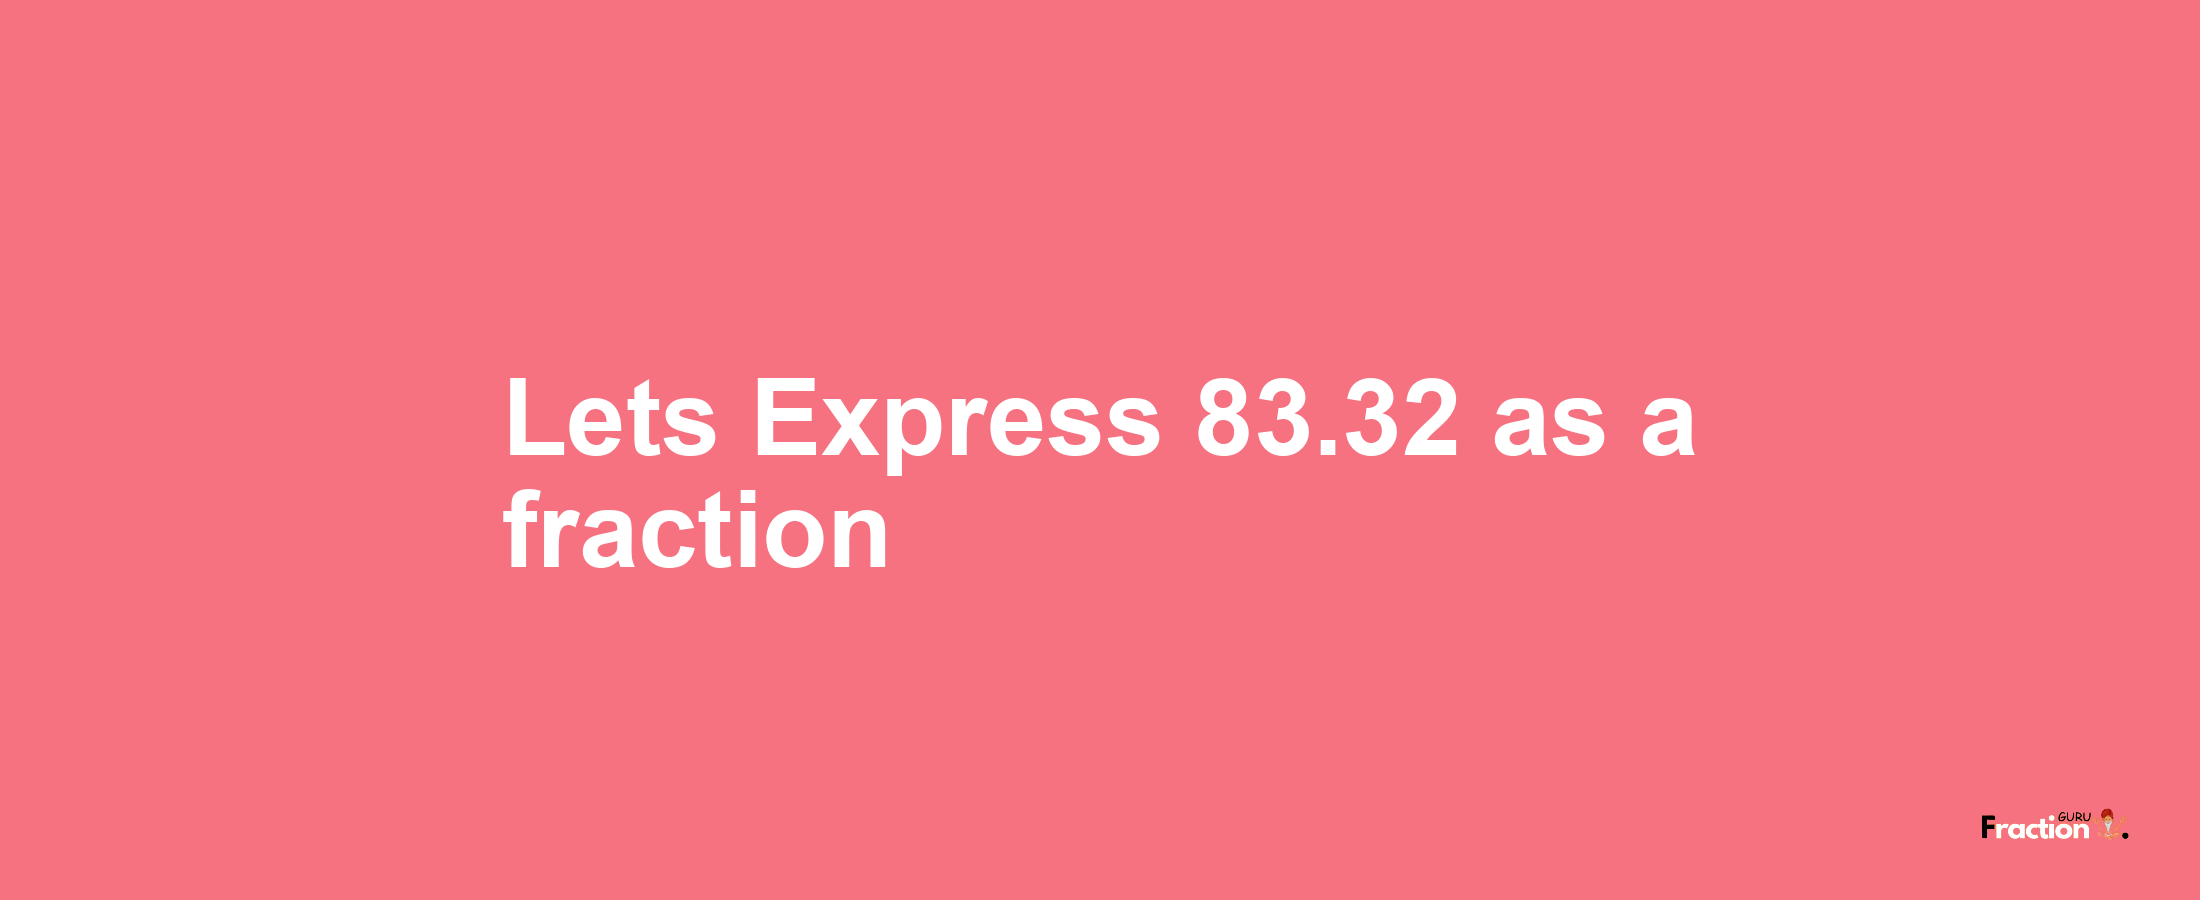 Lets Express 83.32 as afraction